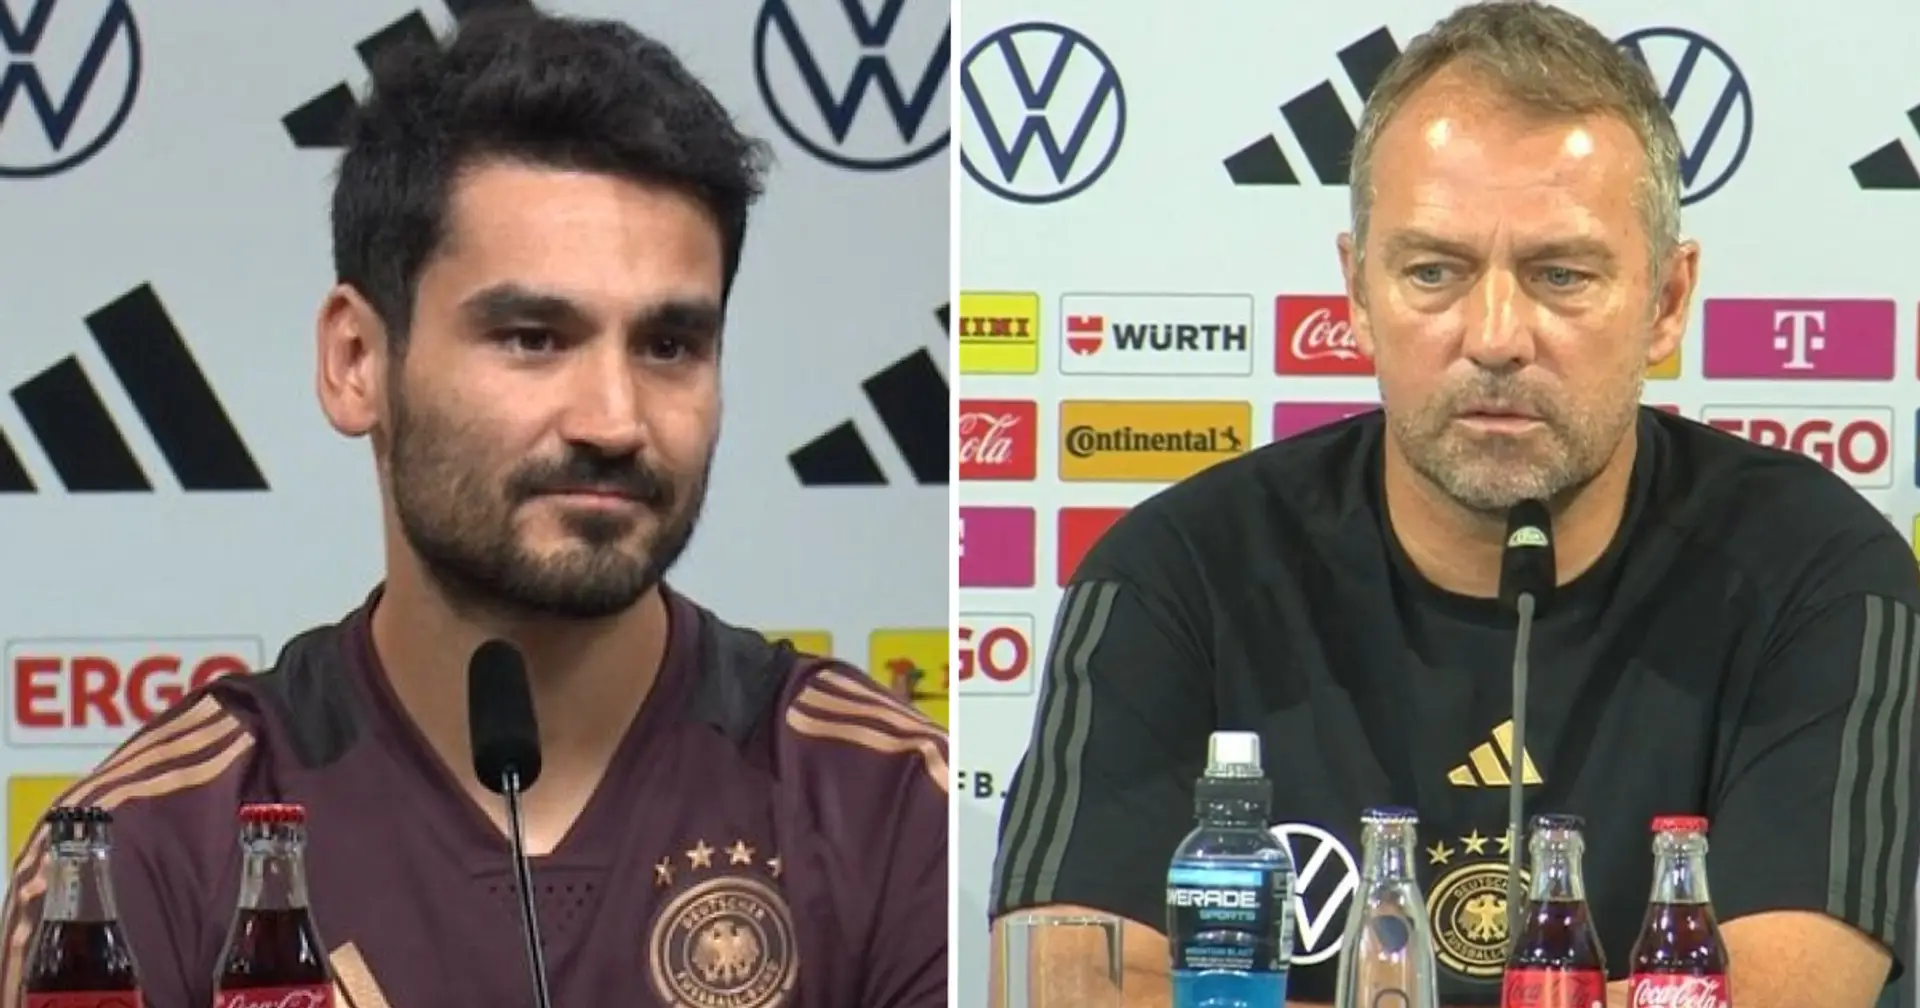 'I let him down': Gundogan speaks out as Germany coach is fired days after naming him captain